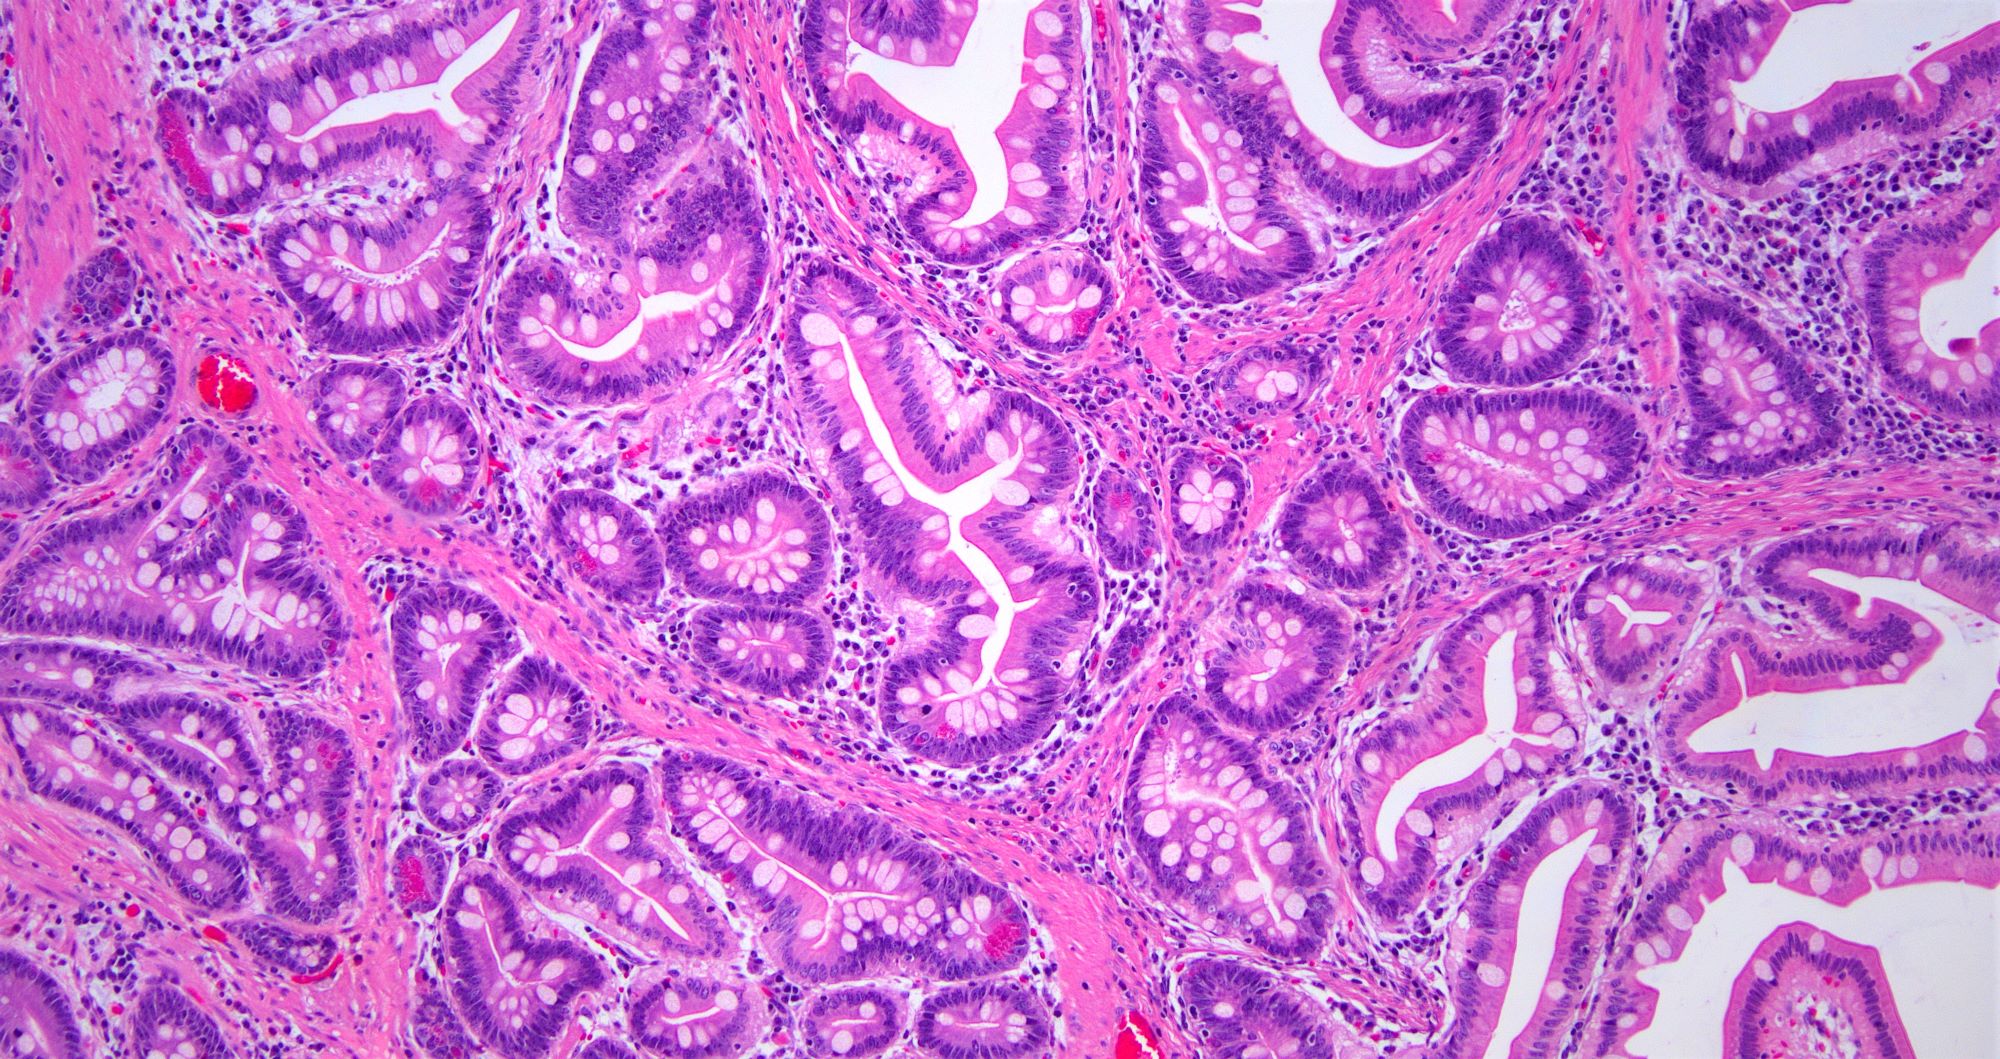 Bland epithelial component in PJP